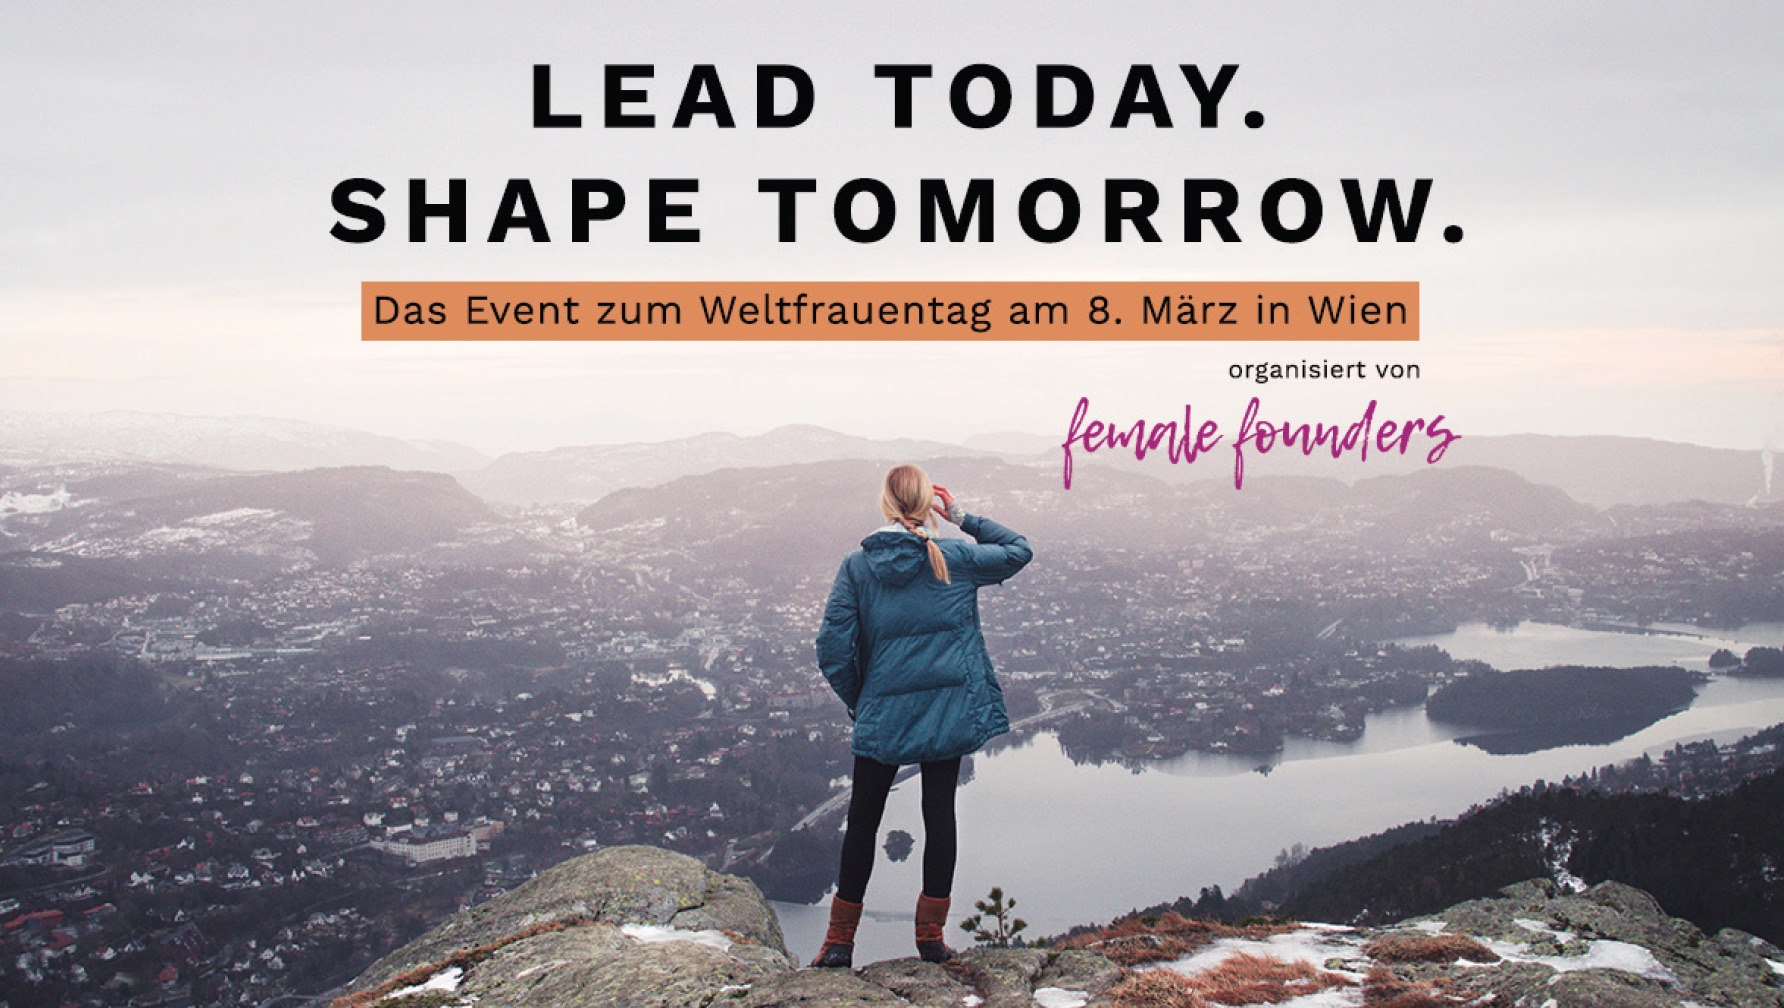 8. März 2019 – Weltfrauentag: LEAD TODAY. SHAPE TOMORROW